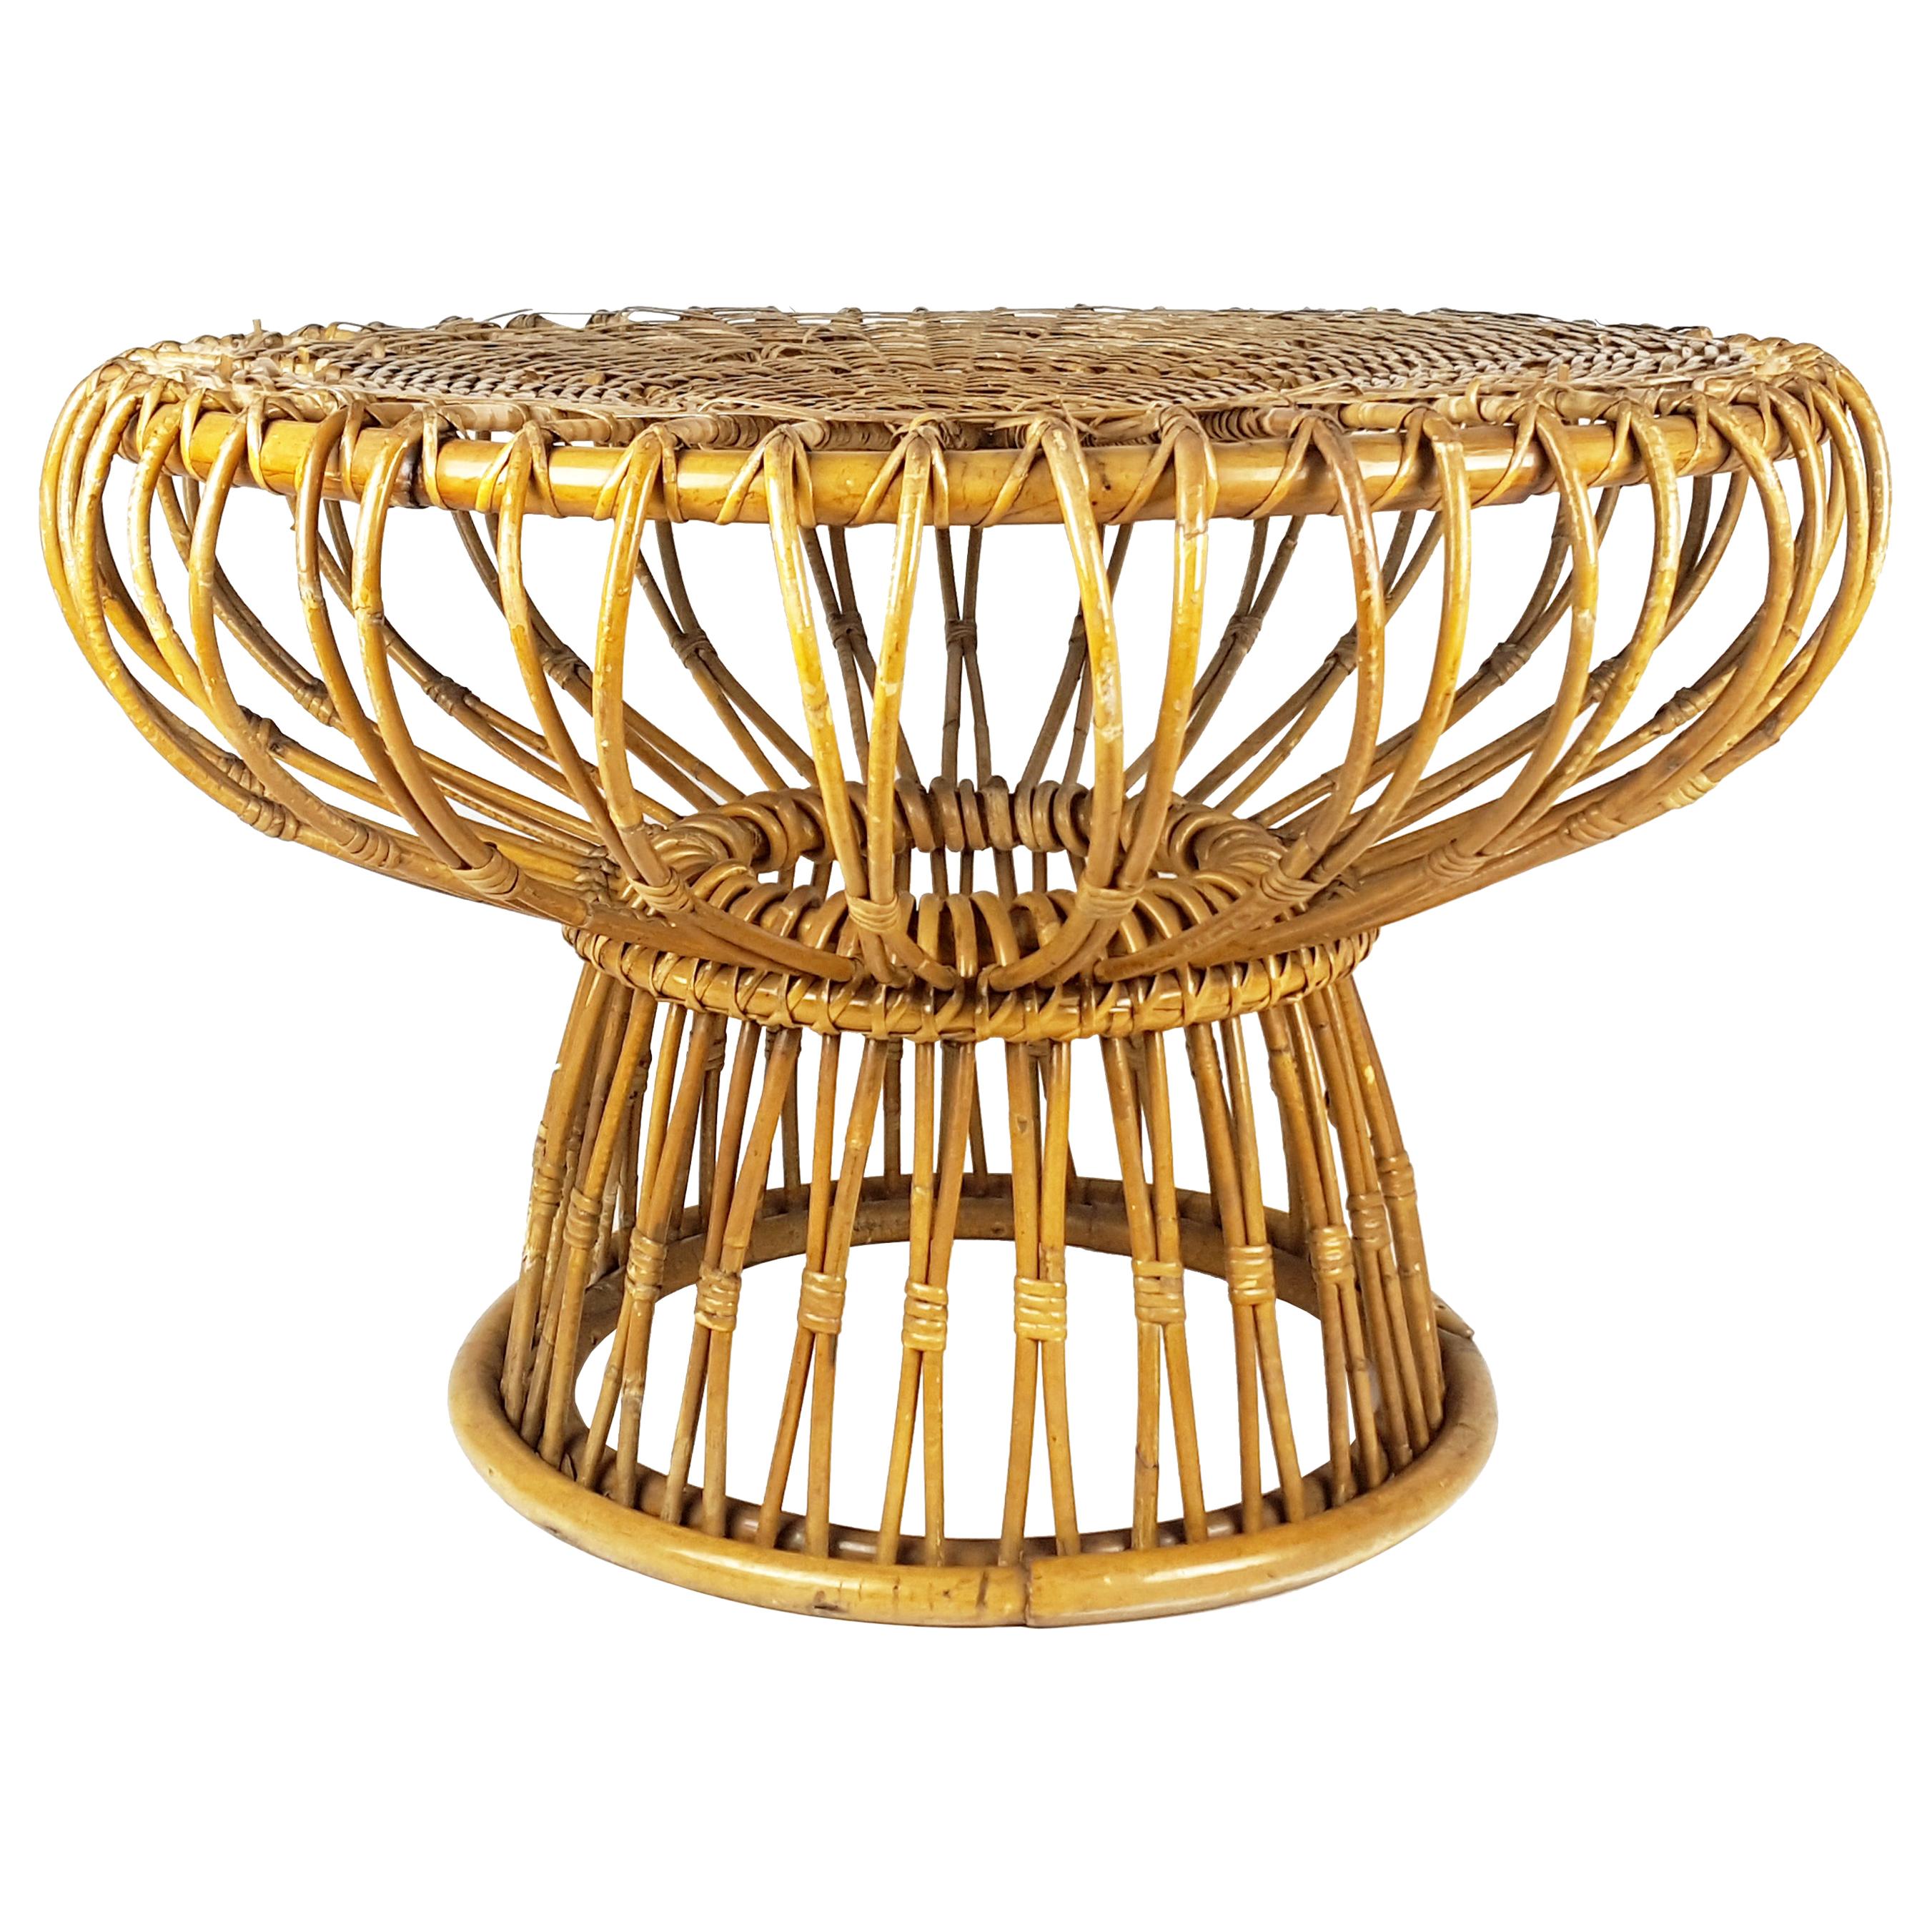 Rush and Rattan Midcentury Round Coffee Table by Franca Helg for Bonacina, 1955 For Sale